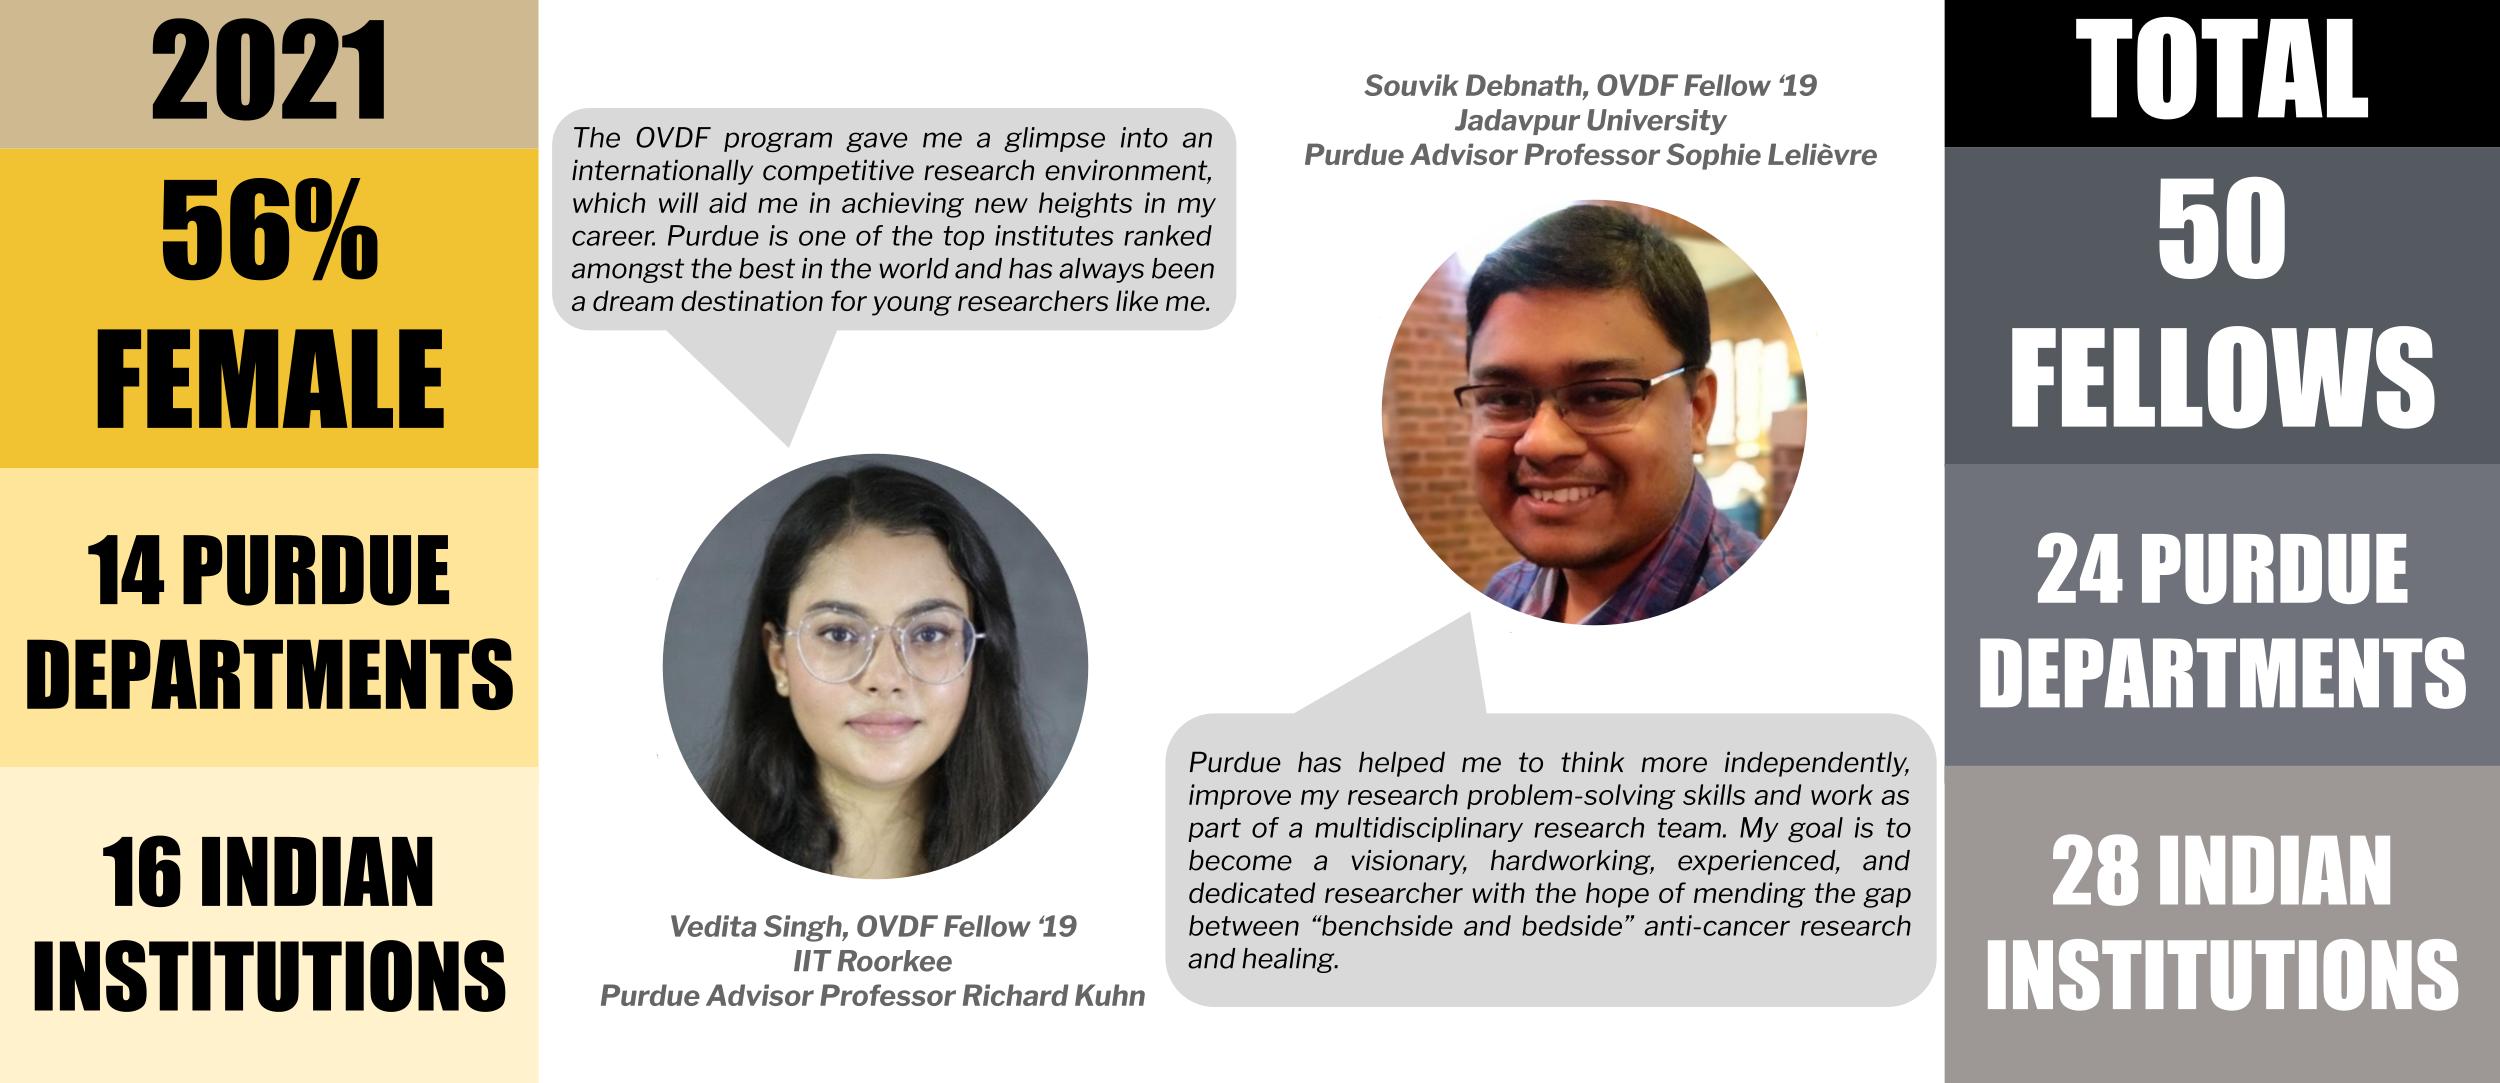 Photo for Purdue Welcomes New Cohort of Indian Researchers Under Prestigious Fellowship Program | February 2021